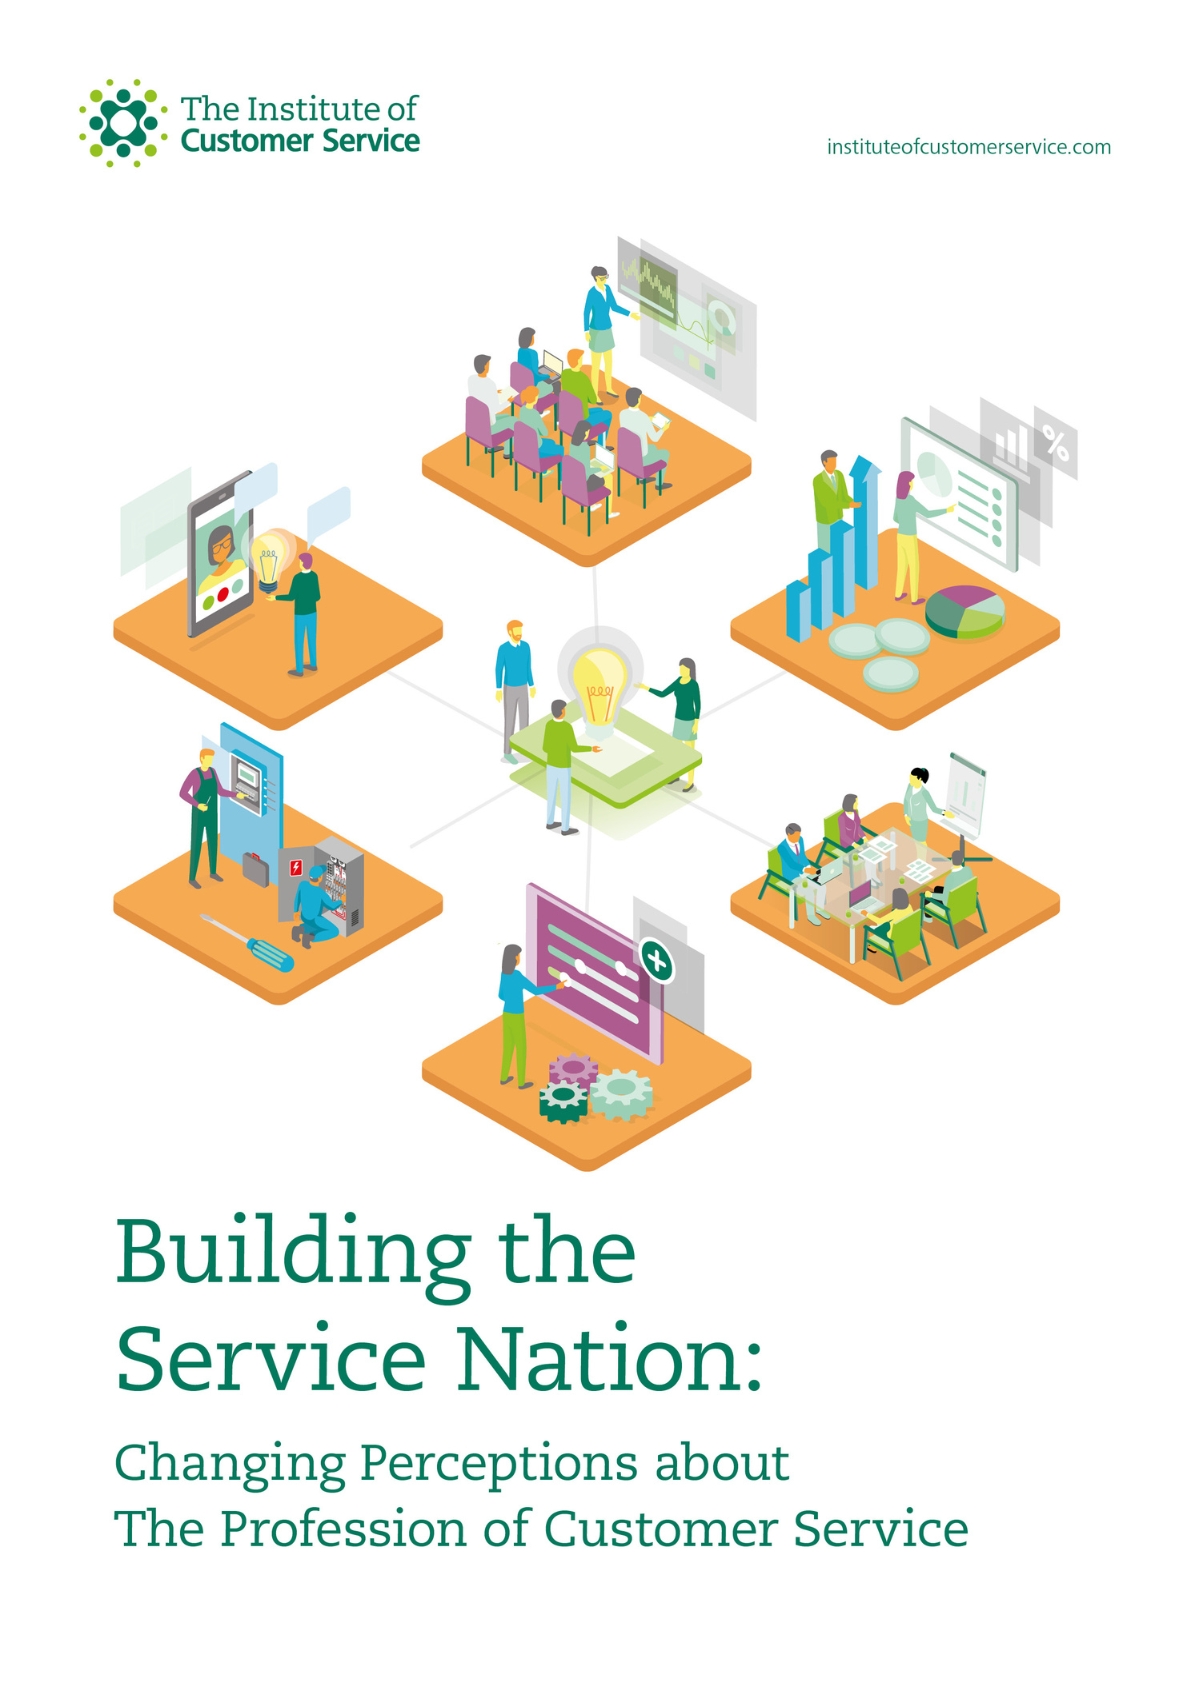 Building the Service Nation: Changing Perceptions about the Profession of Customer Service